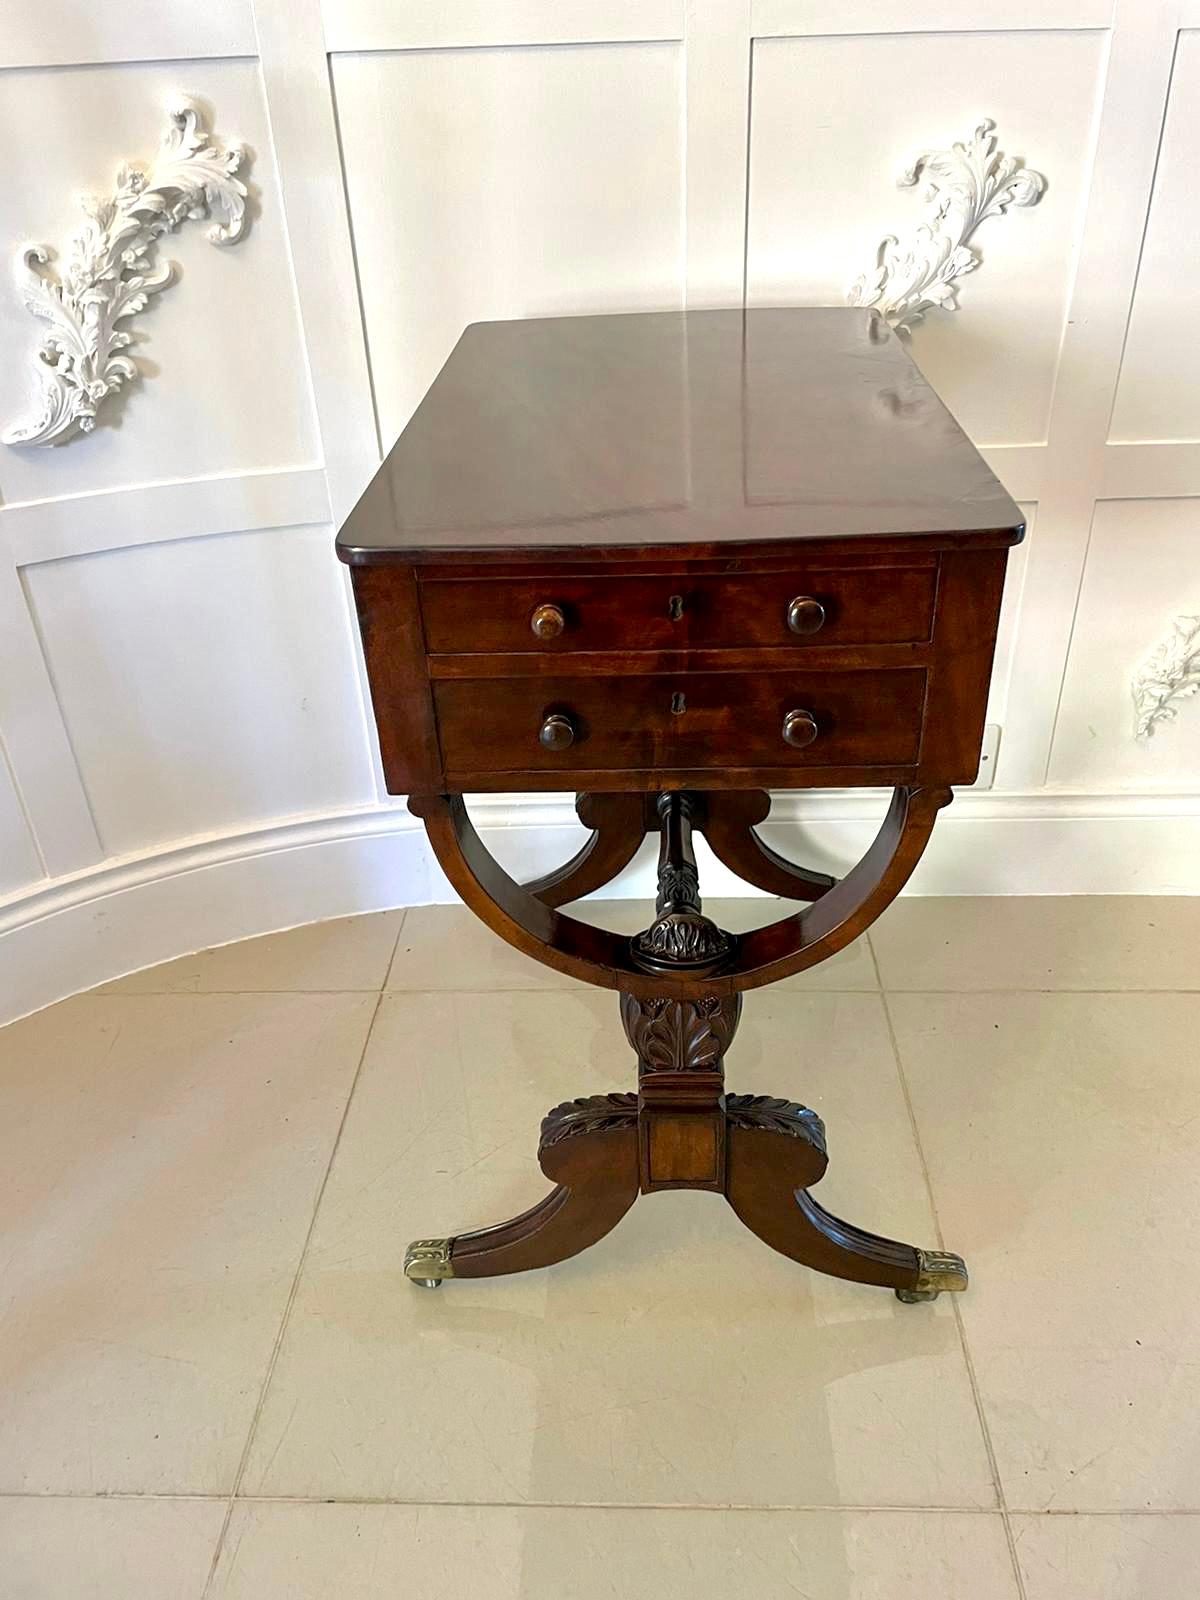 Other Unusual Outstanding Quality Antique Freestanding Figured Mahogany Centre Table For Sale